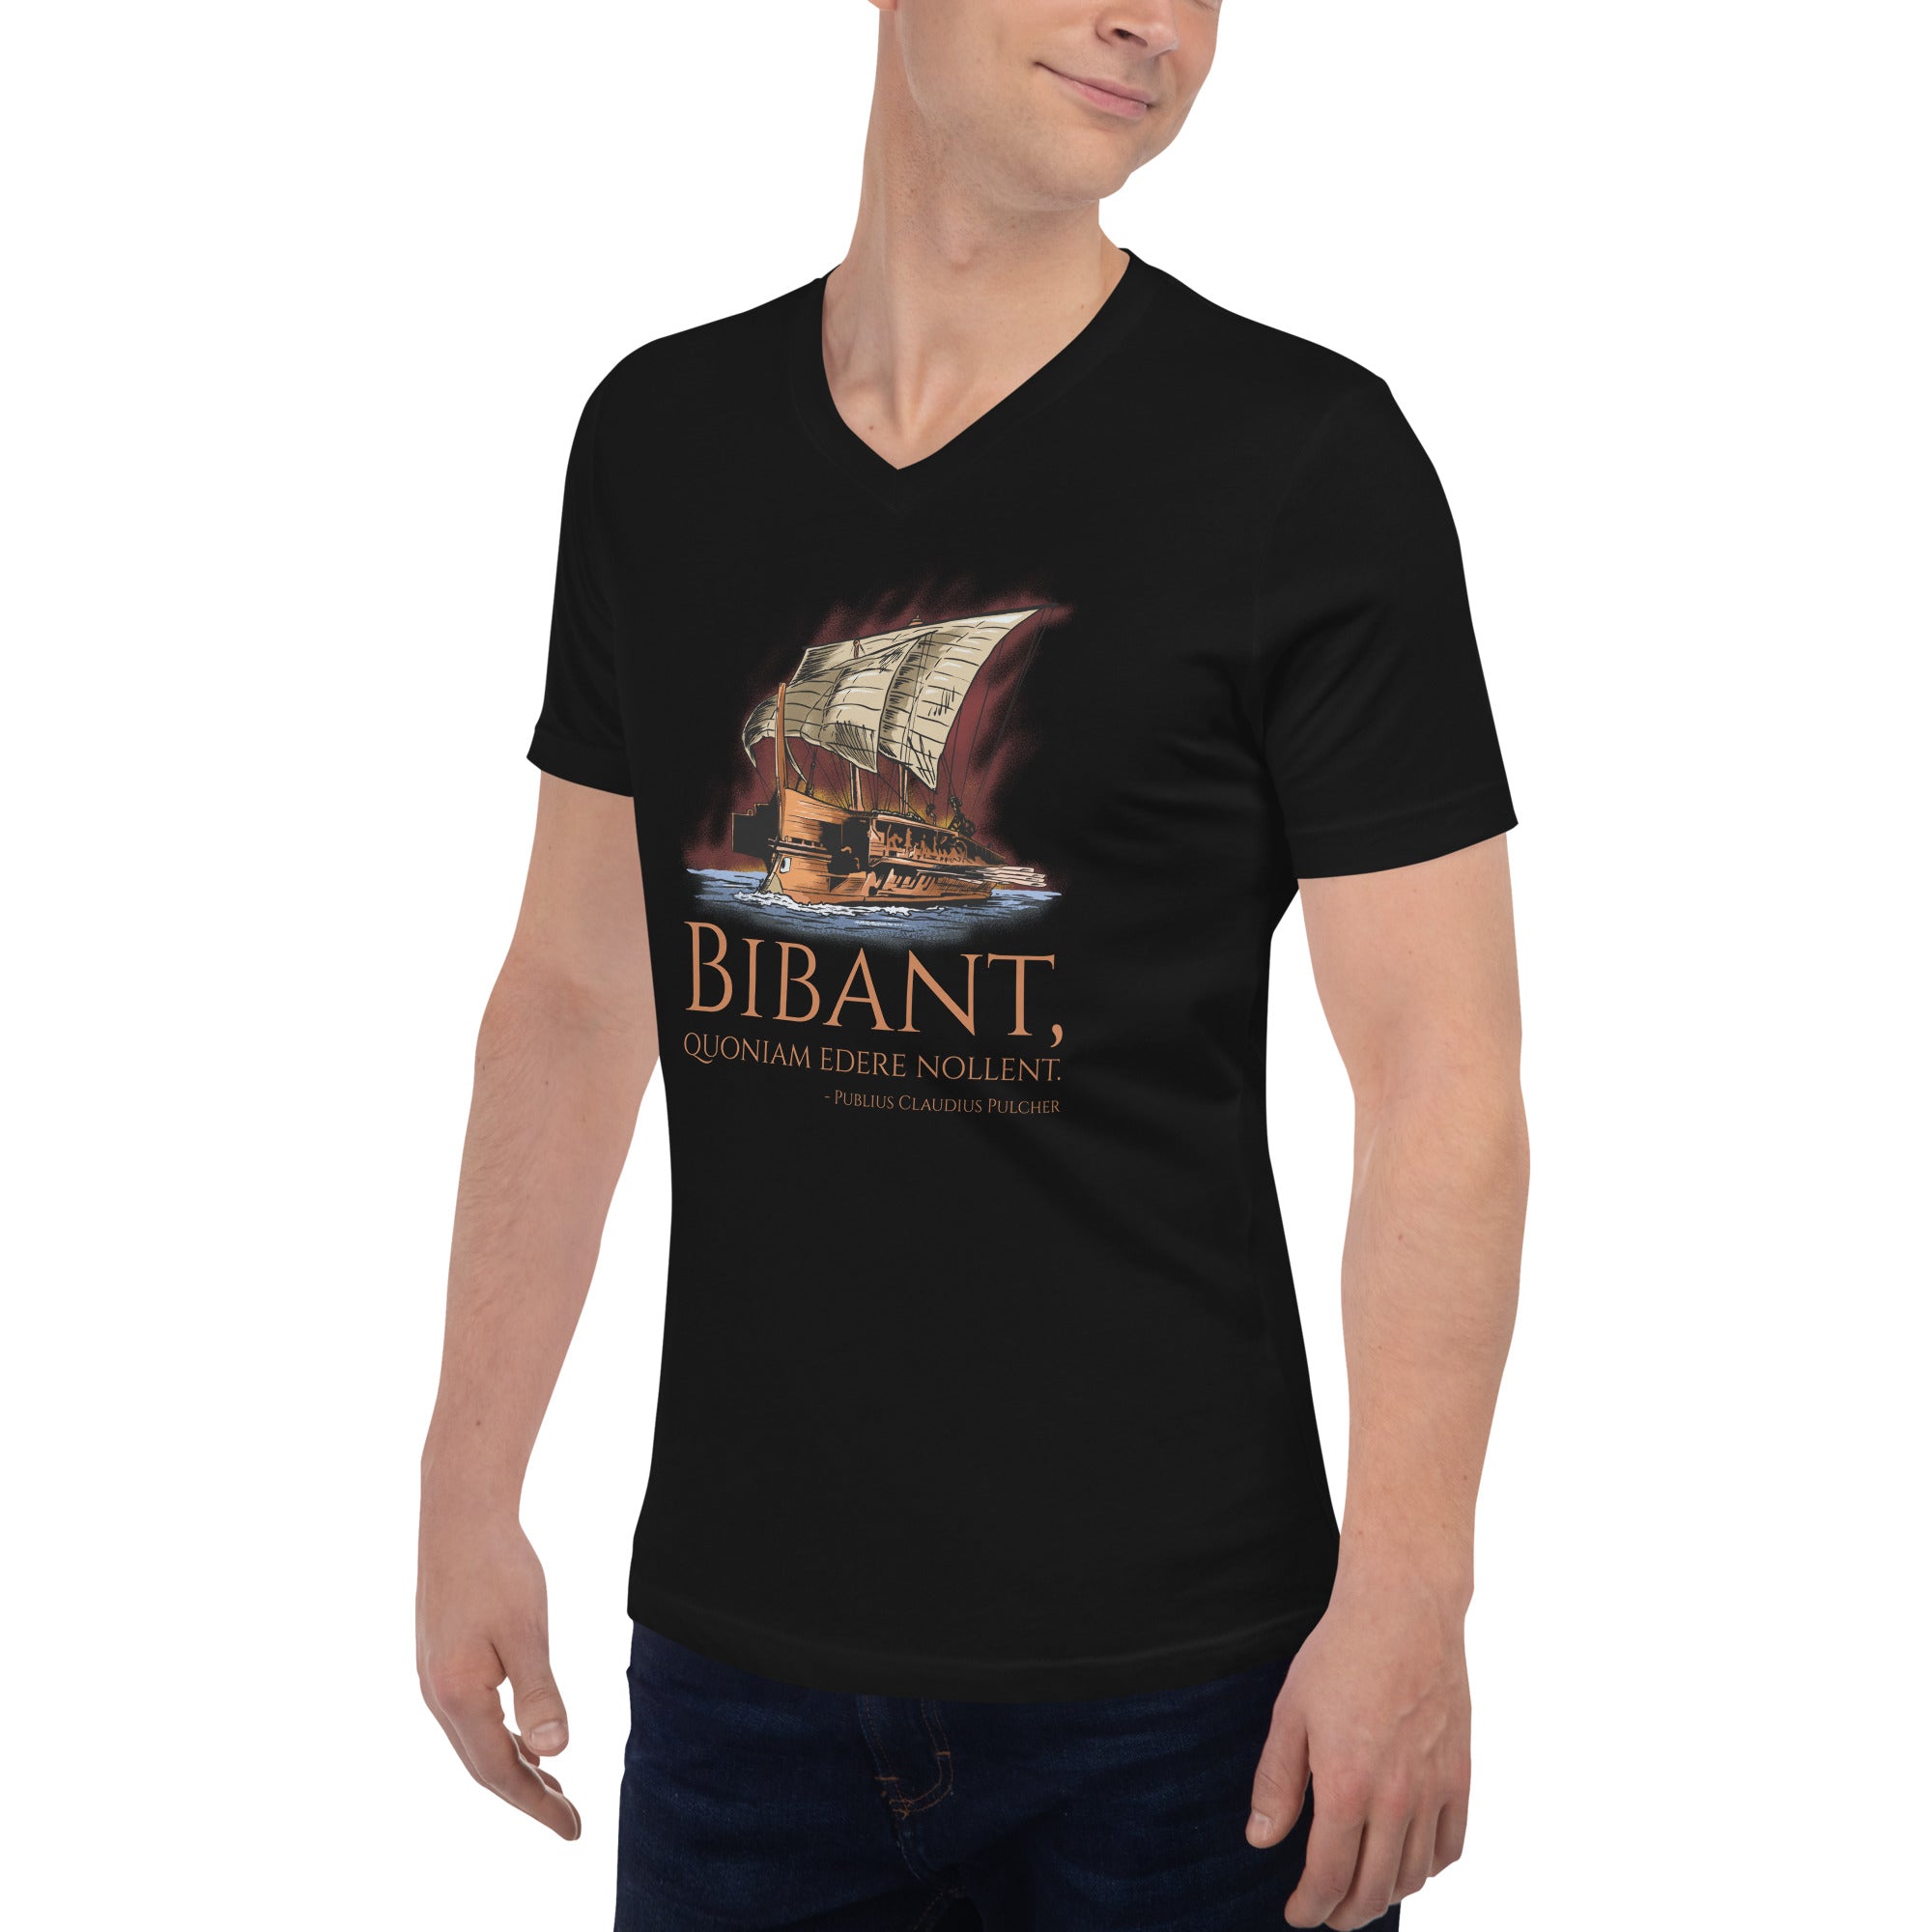 Ancient Rome - The Sacred Chickens - First Punic War - Classical Latin - Unisex Short Sleeve V-Neck T-Shirt